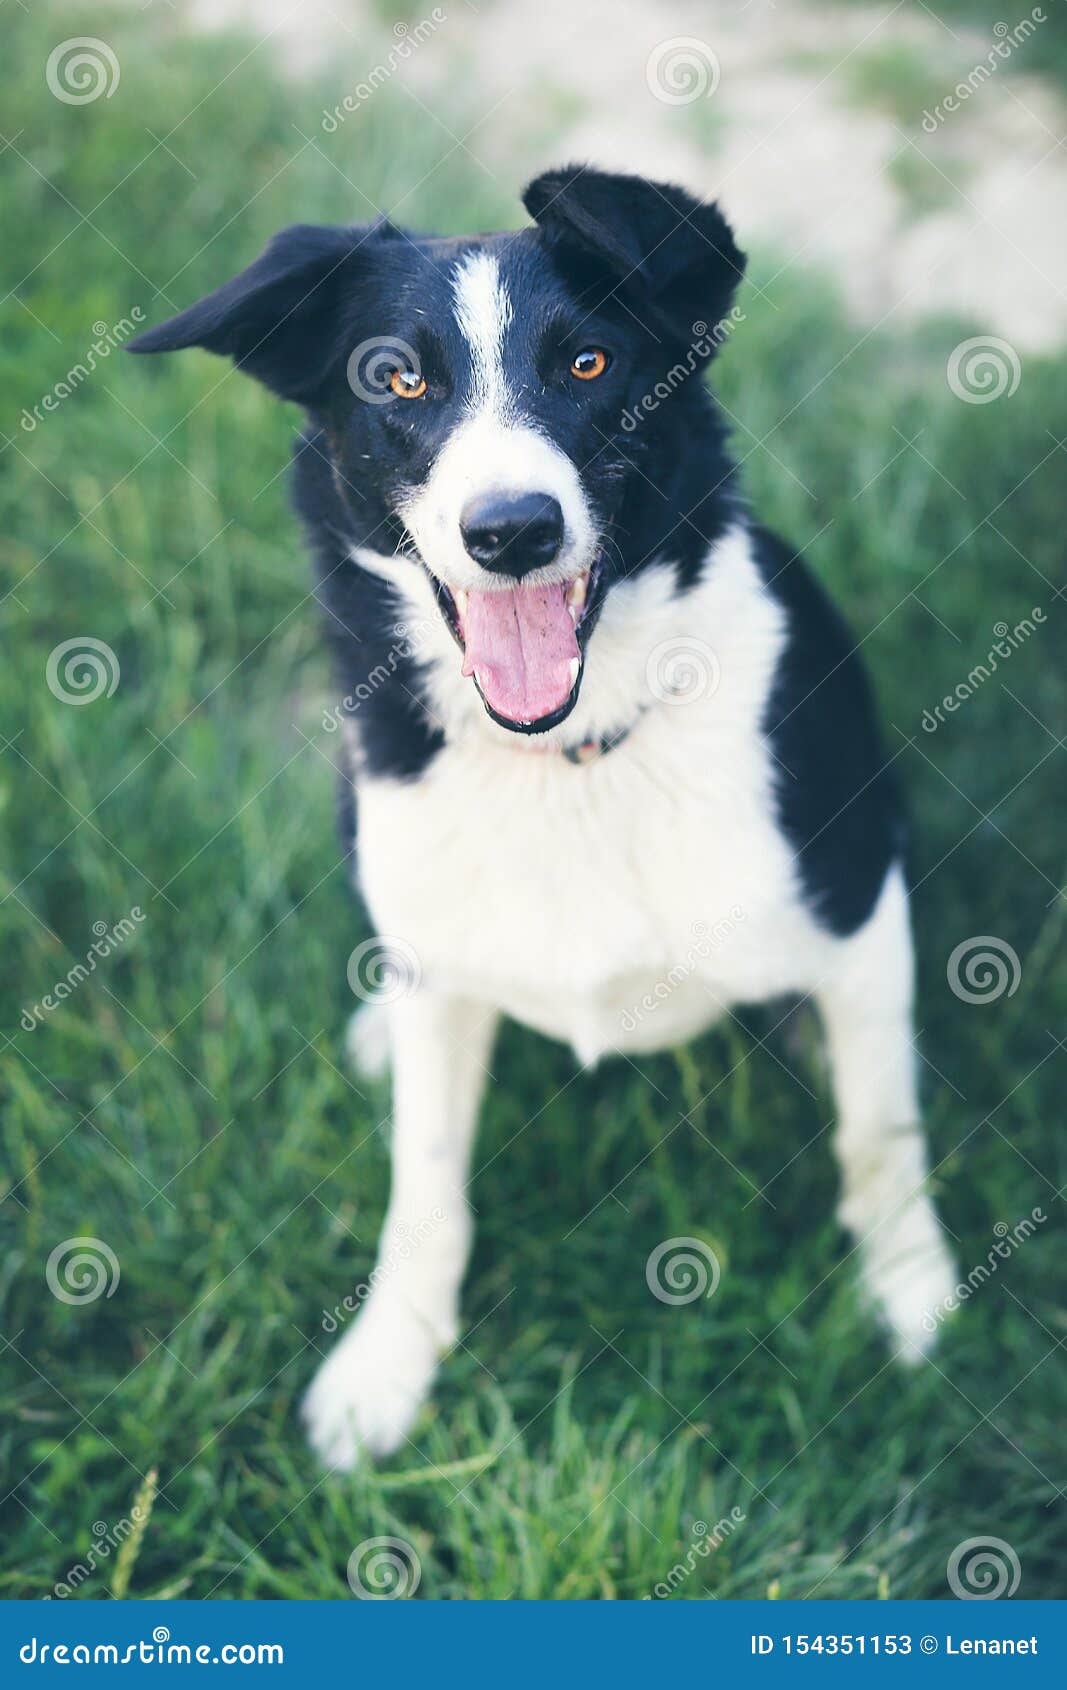 Border collie on grass stock image. Image of cross, body - 154351153